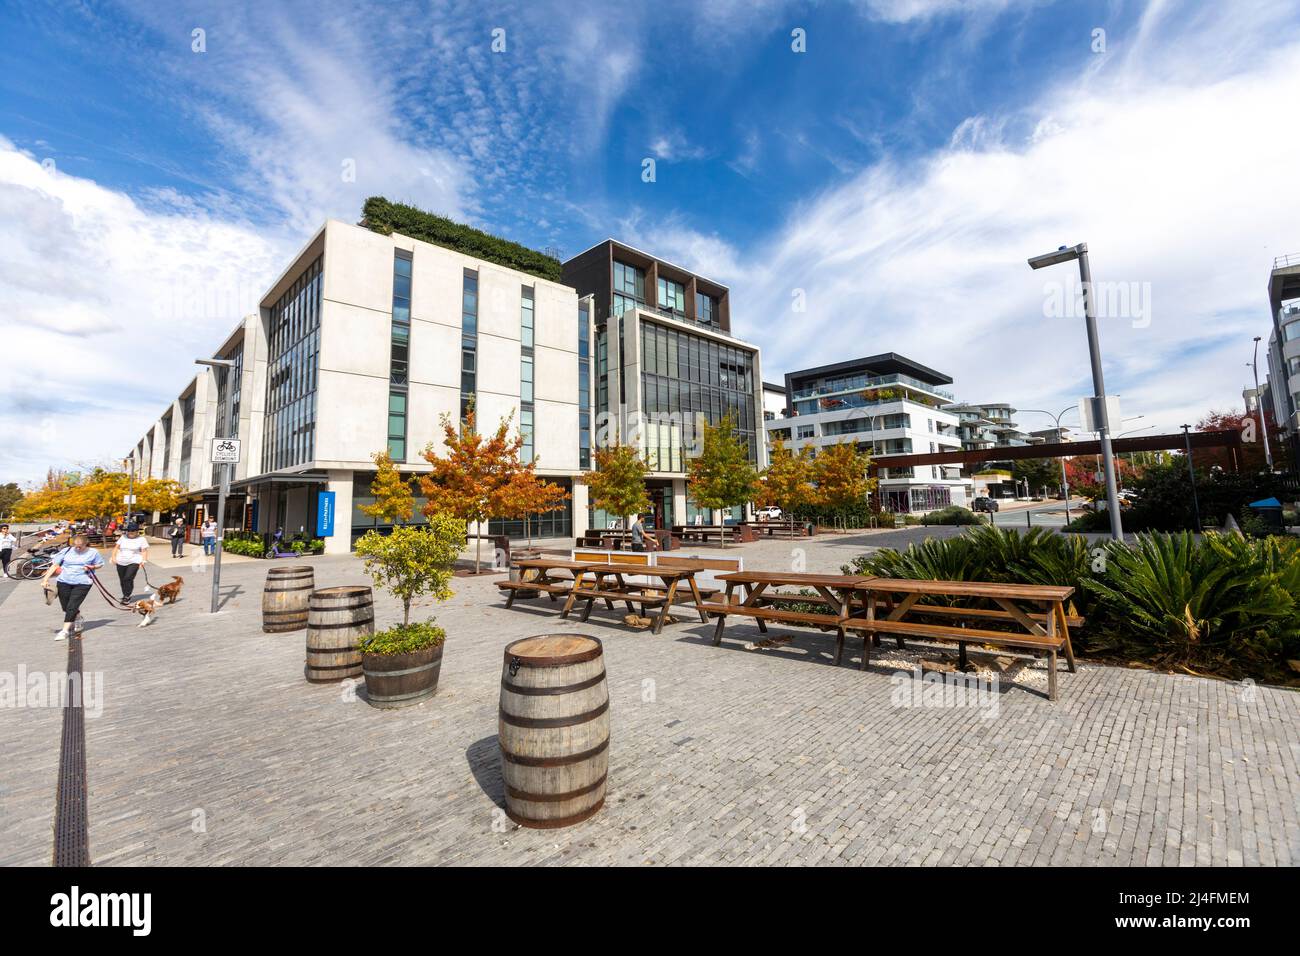 Kingston foreshore in Canberra with lake burley griffin and autumn colours on the leaves in this mixed use foreshore development,Australia Stock Photo